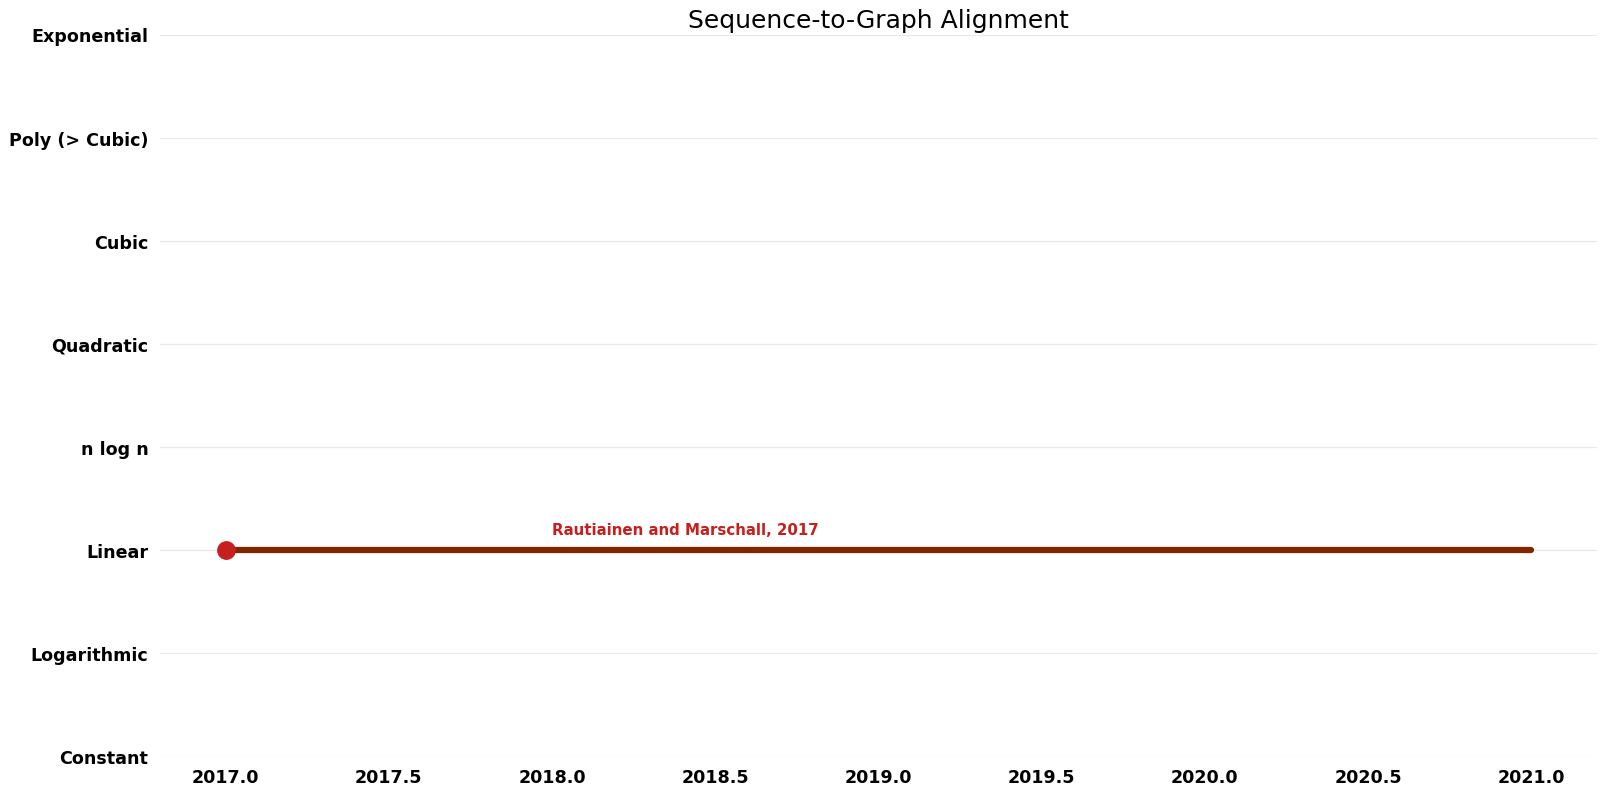 File:Sequence-to-Graph Alignment - Space.png